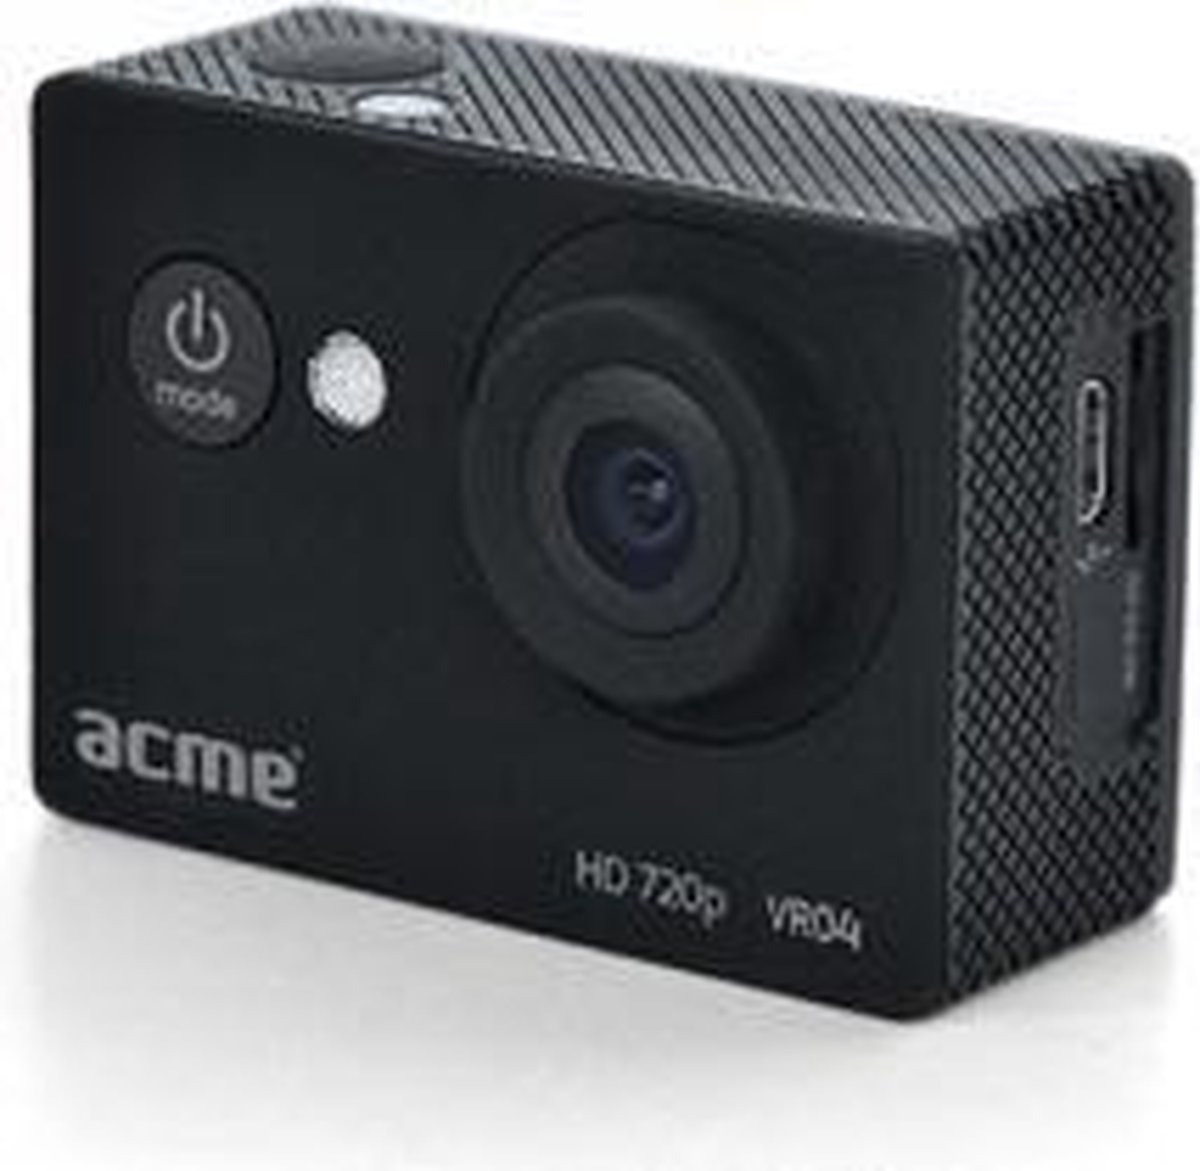 Refurbished Action Cam - AgfaPhoto Realimove AC5000 - HD Video